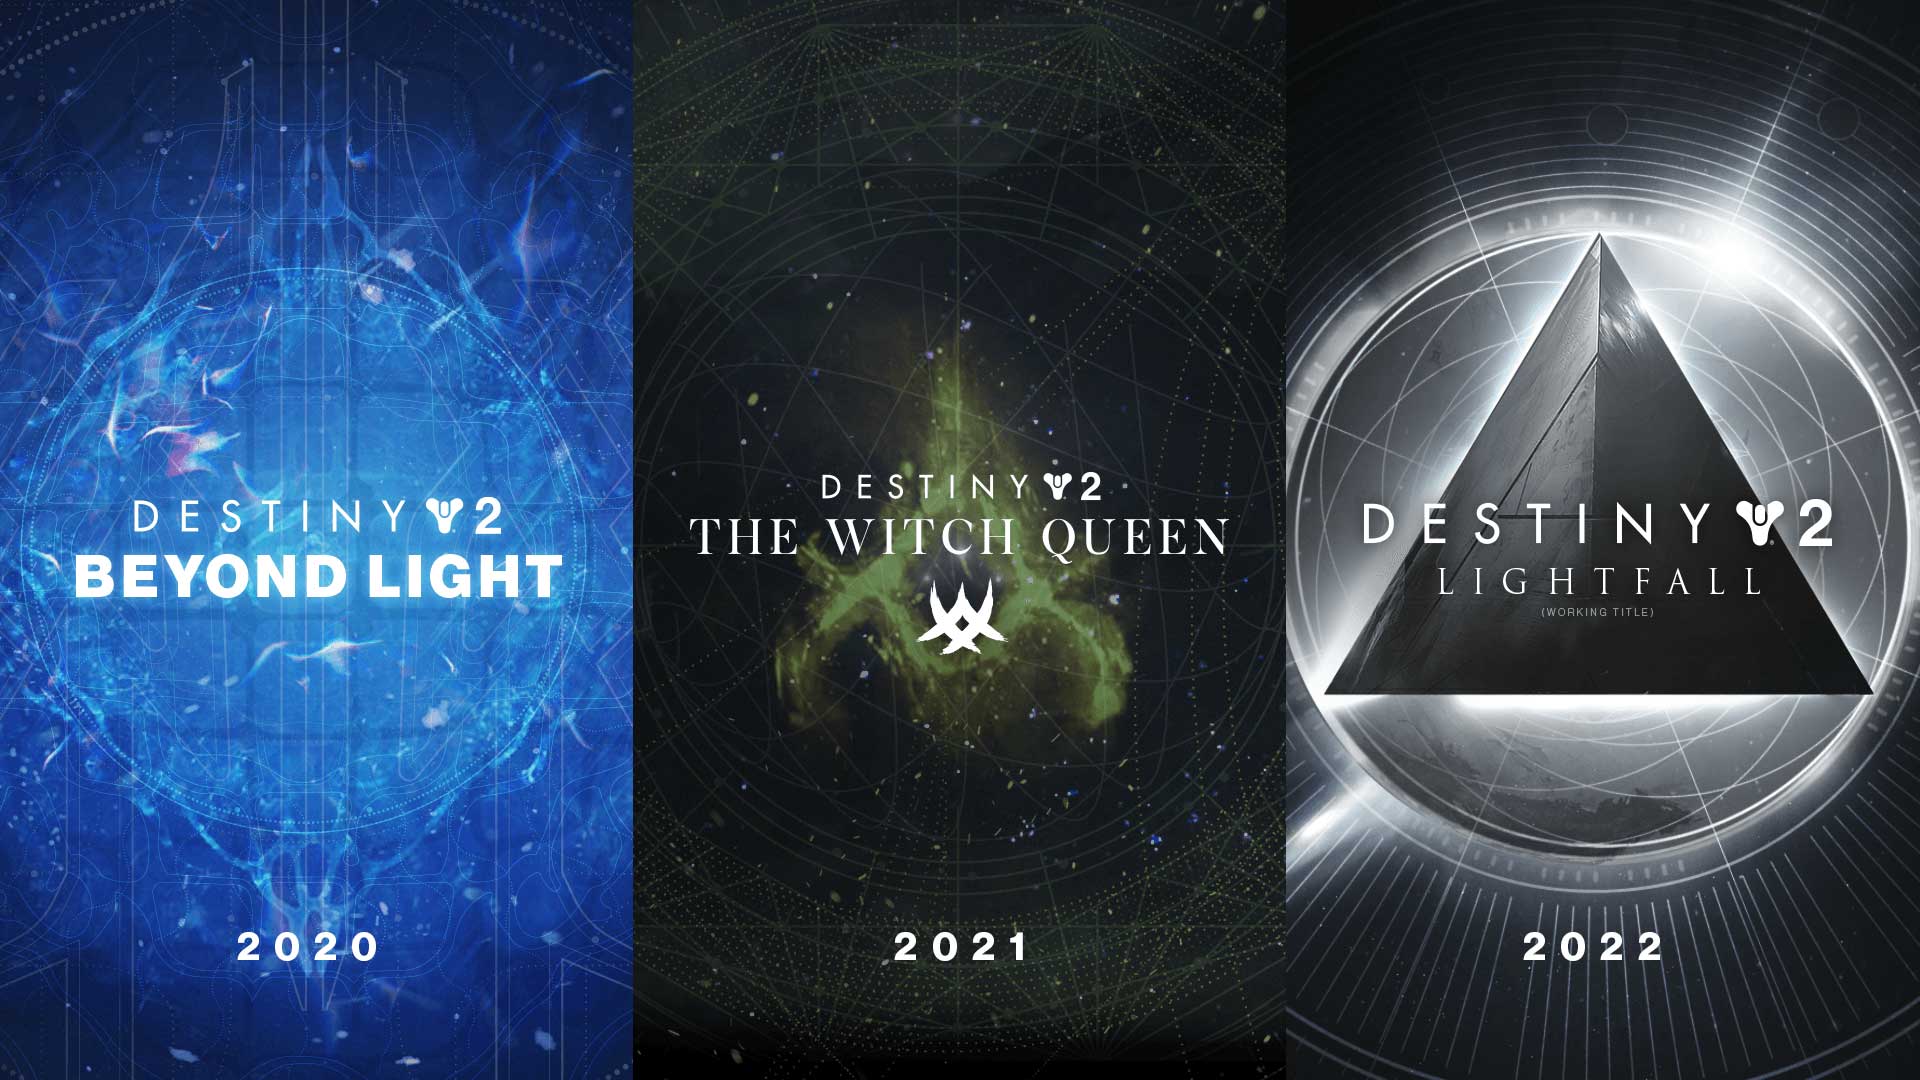 Destiny 2: Beyond Light Announced Along With 2021 and 2022 Expansions